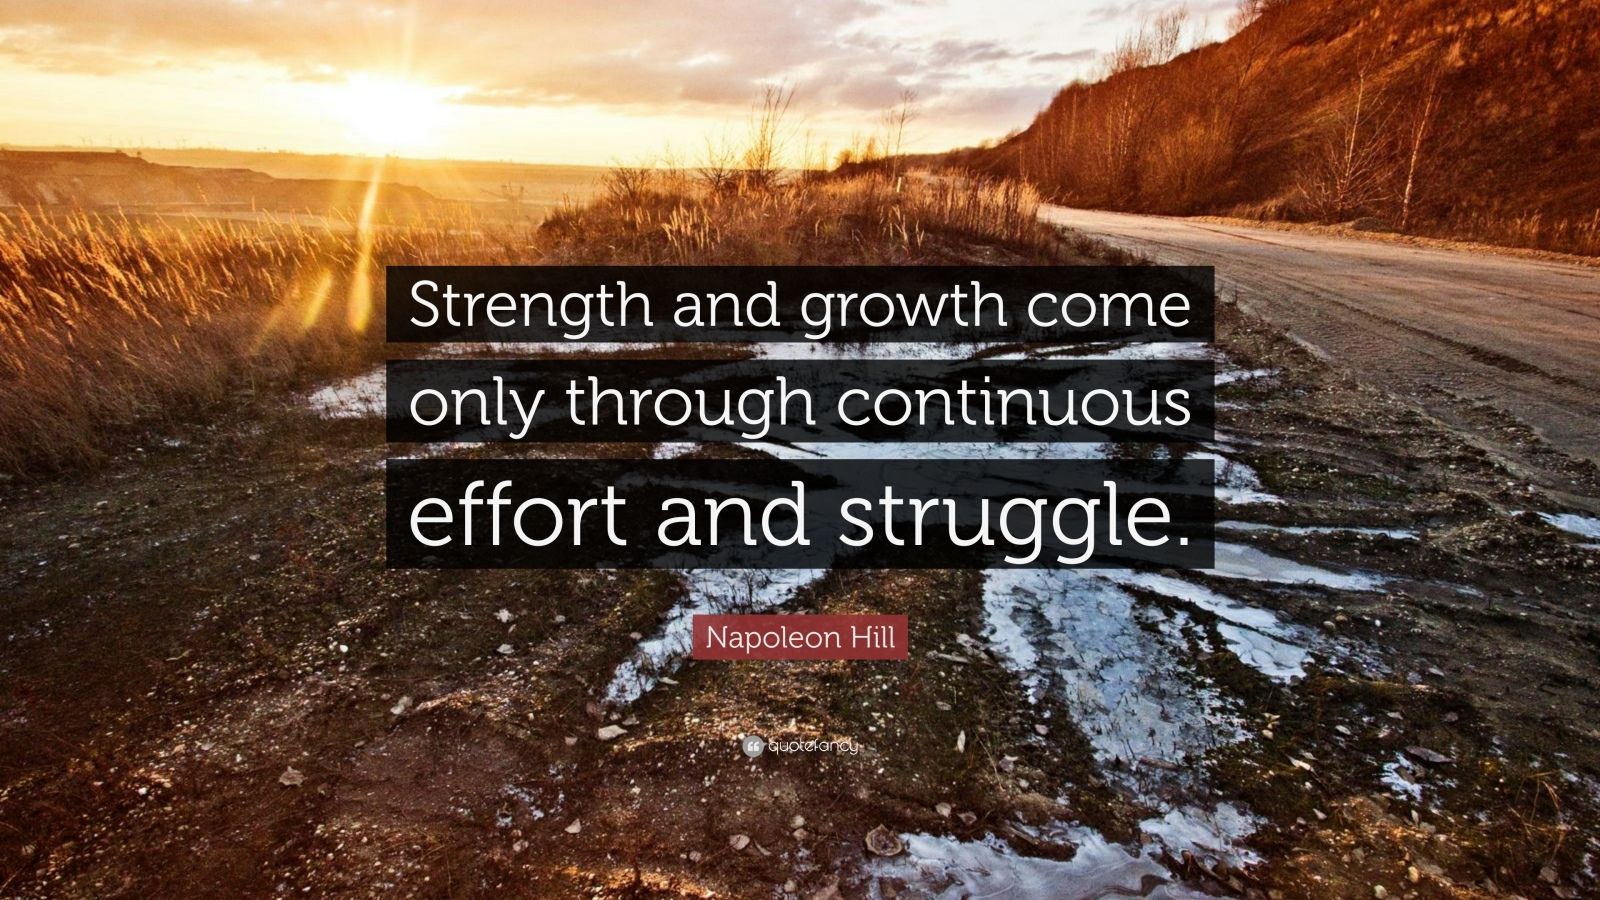 Napoleon Hill Quote: “Strength and growth come only through continuous ...